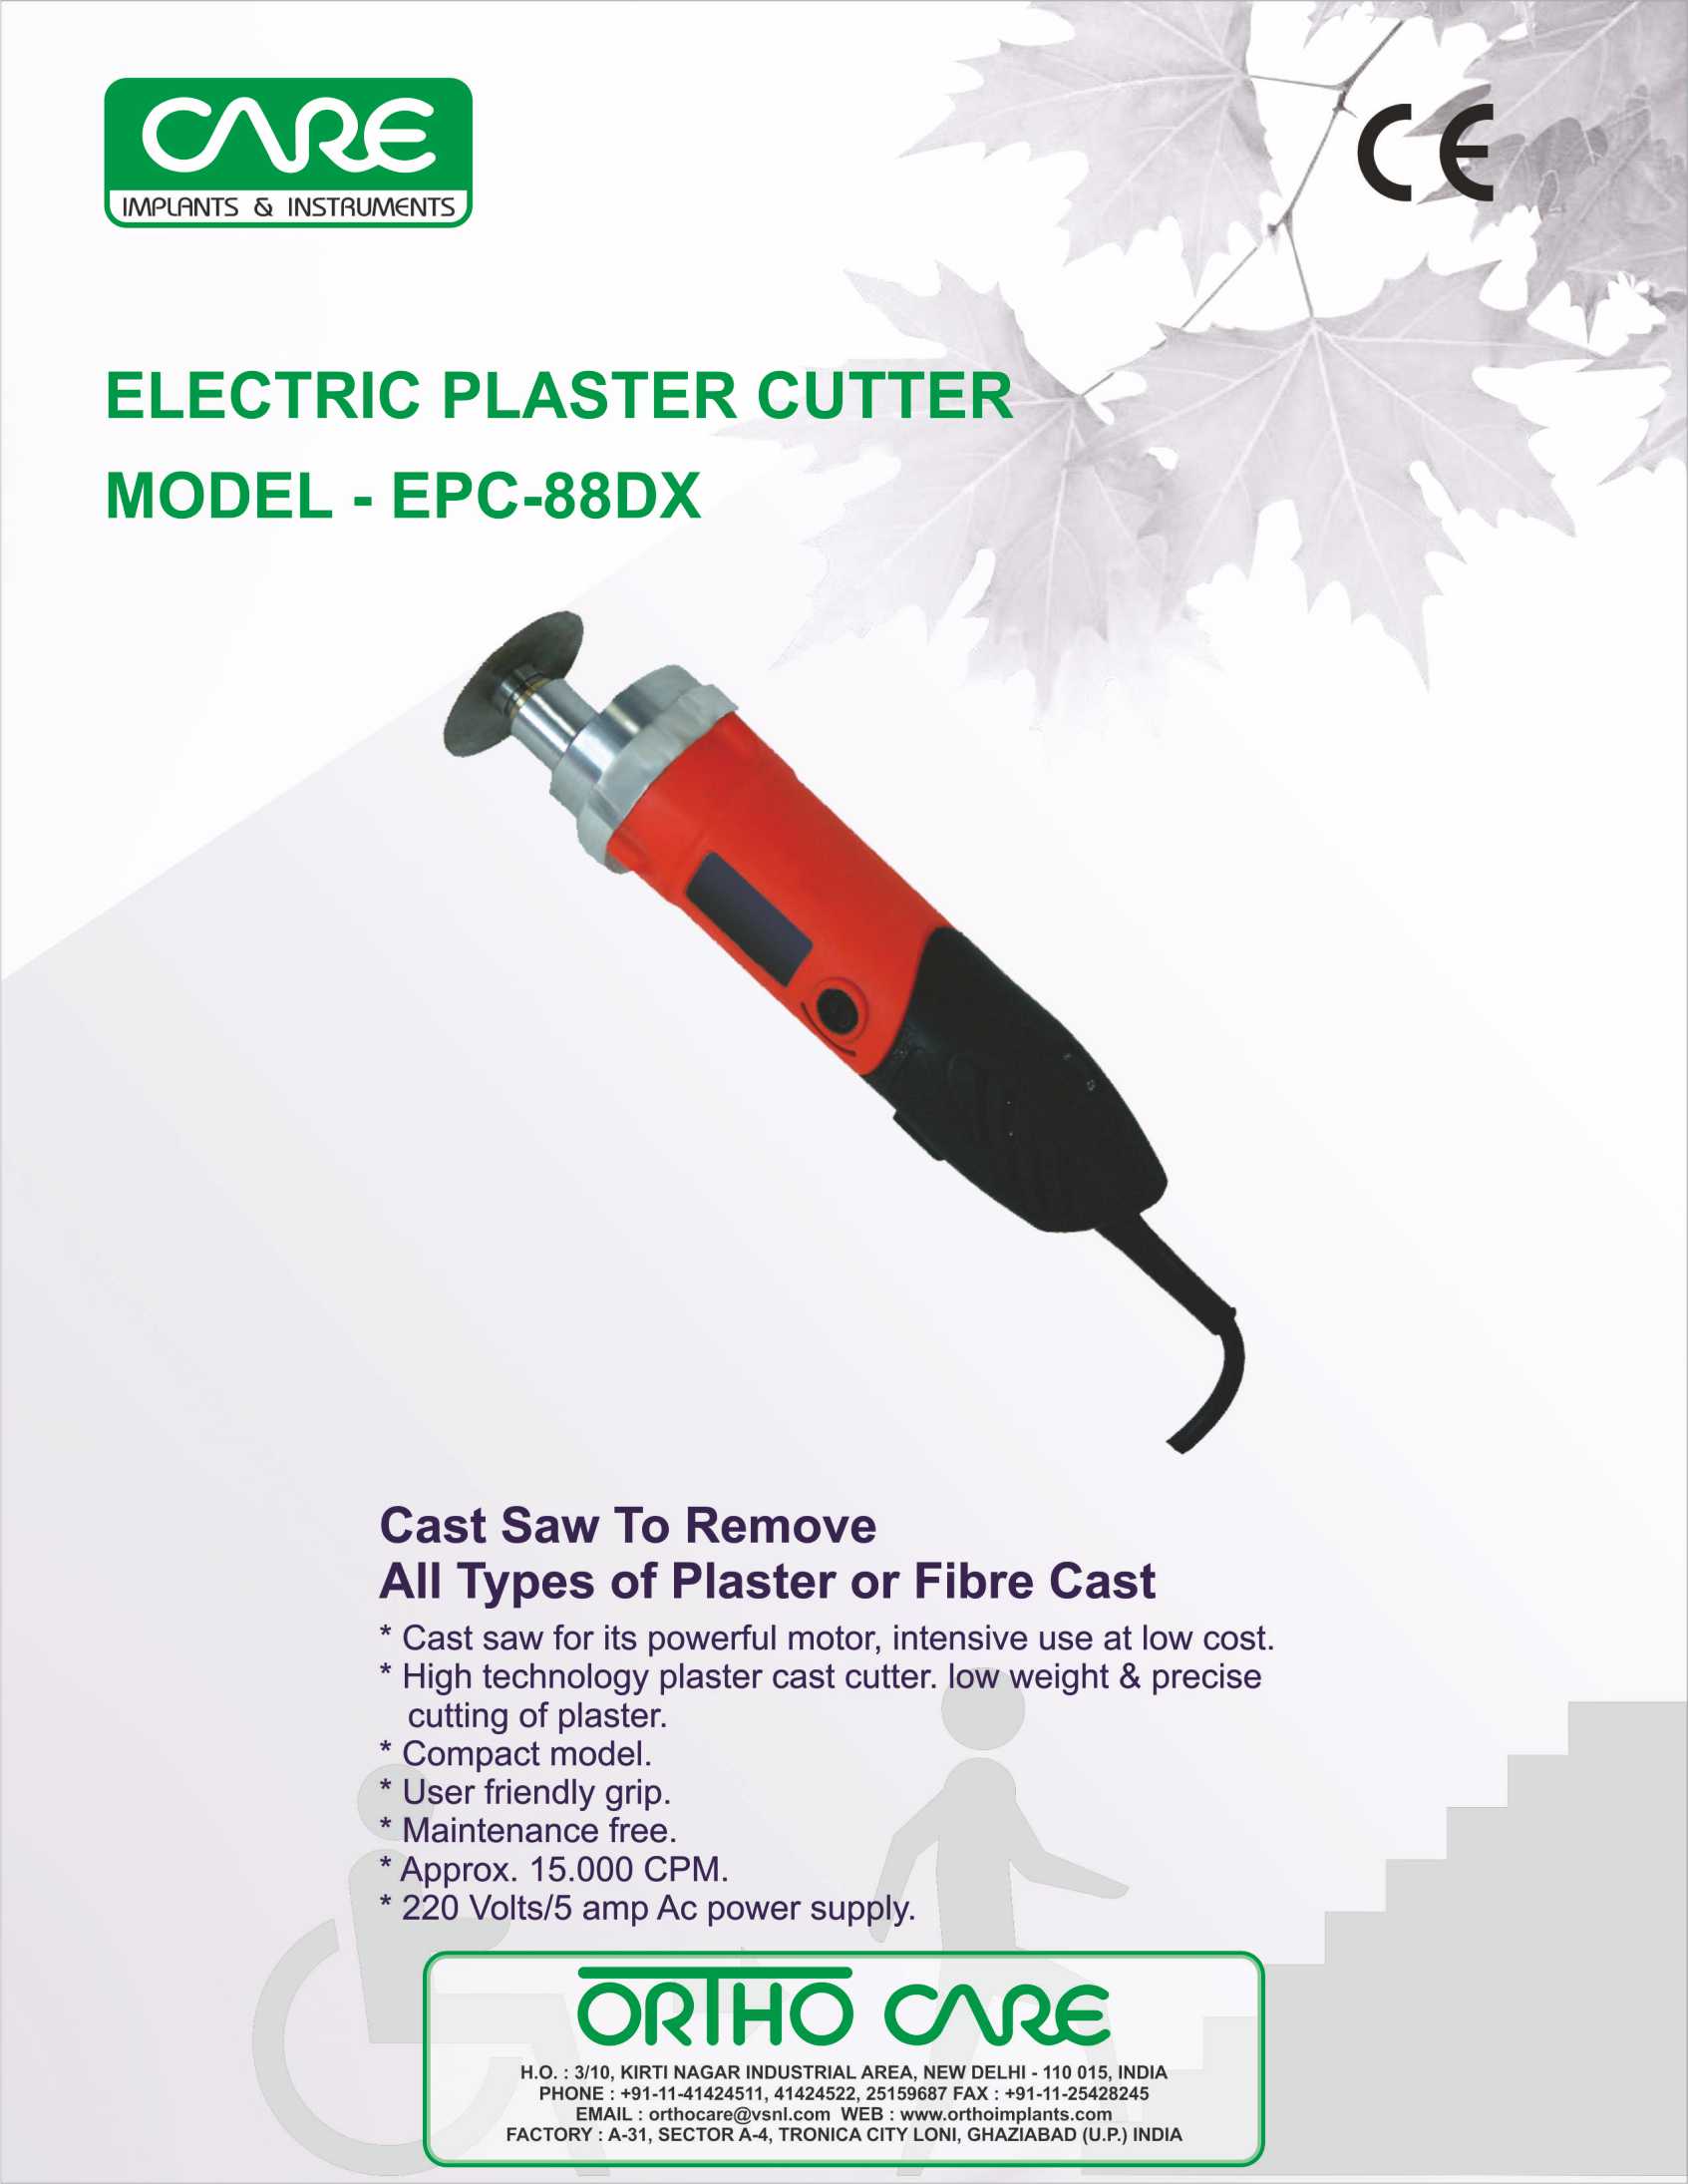 Electric Plastic Cutter - ORTHO CARE